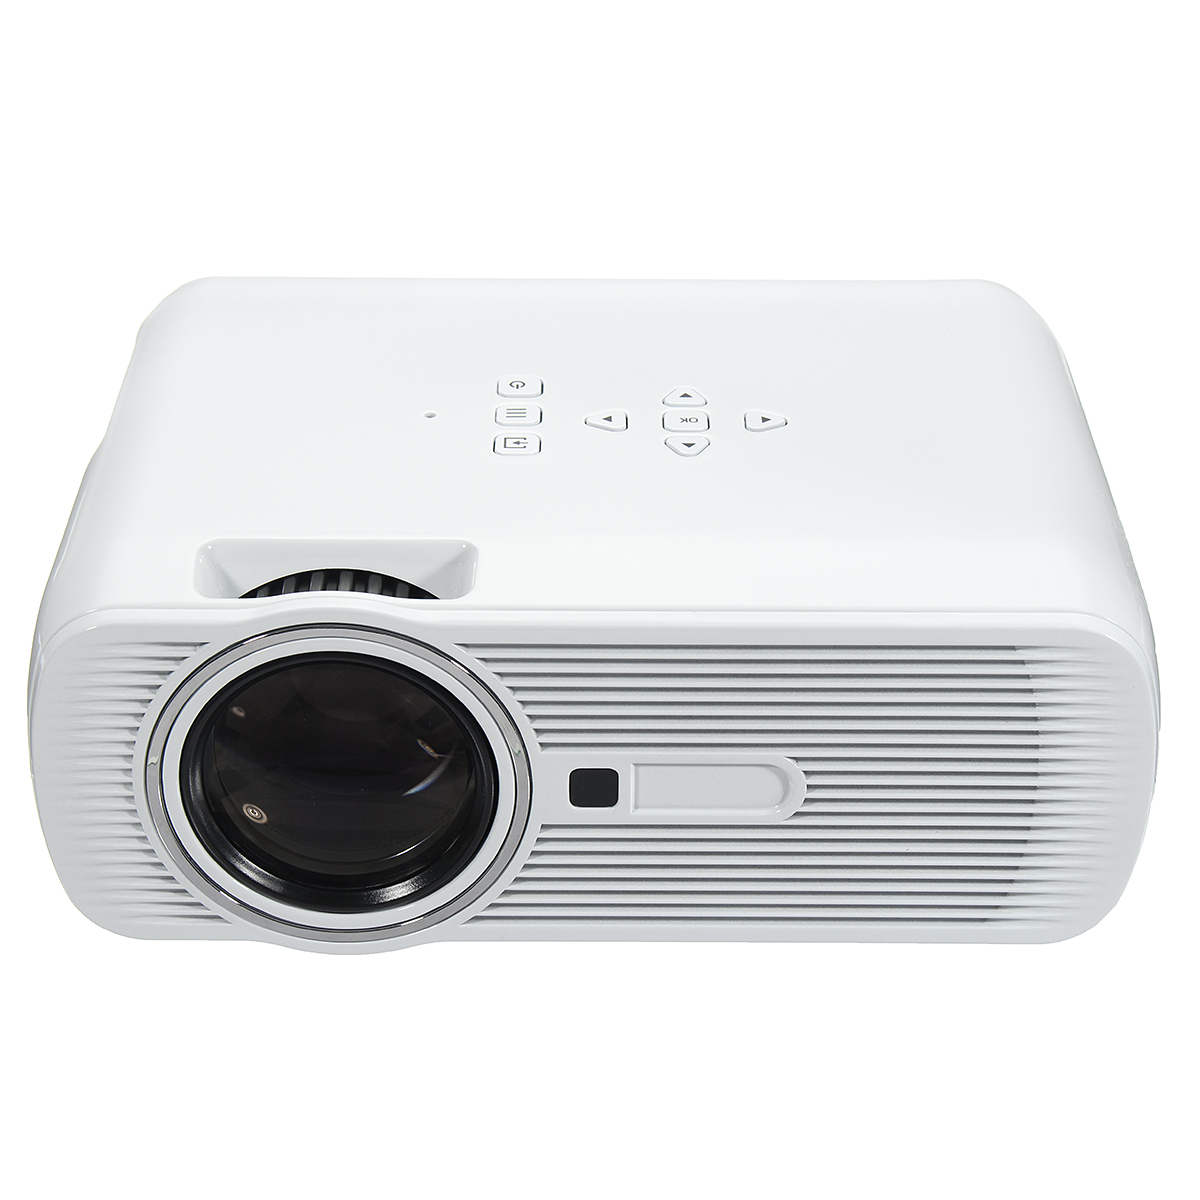 1200-Lumens-800480-Resolution-Portable-HD-LED-Projector-Home-Cinema-Theater-US-Plug-for-Cellphone-1220960